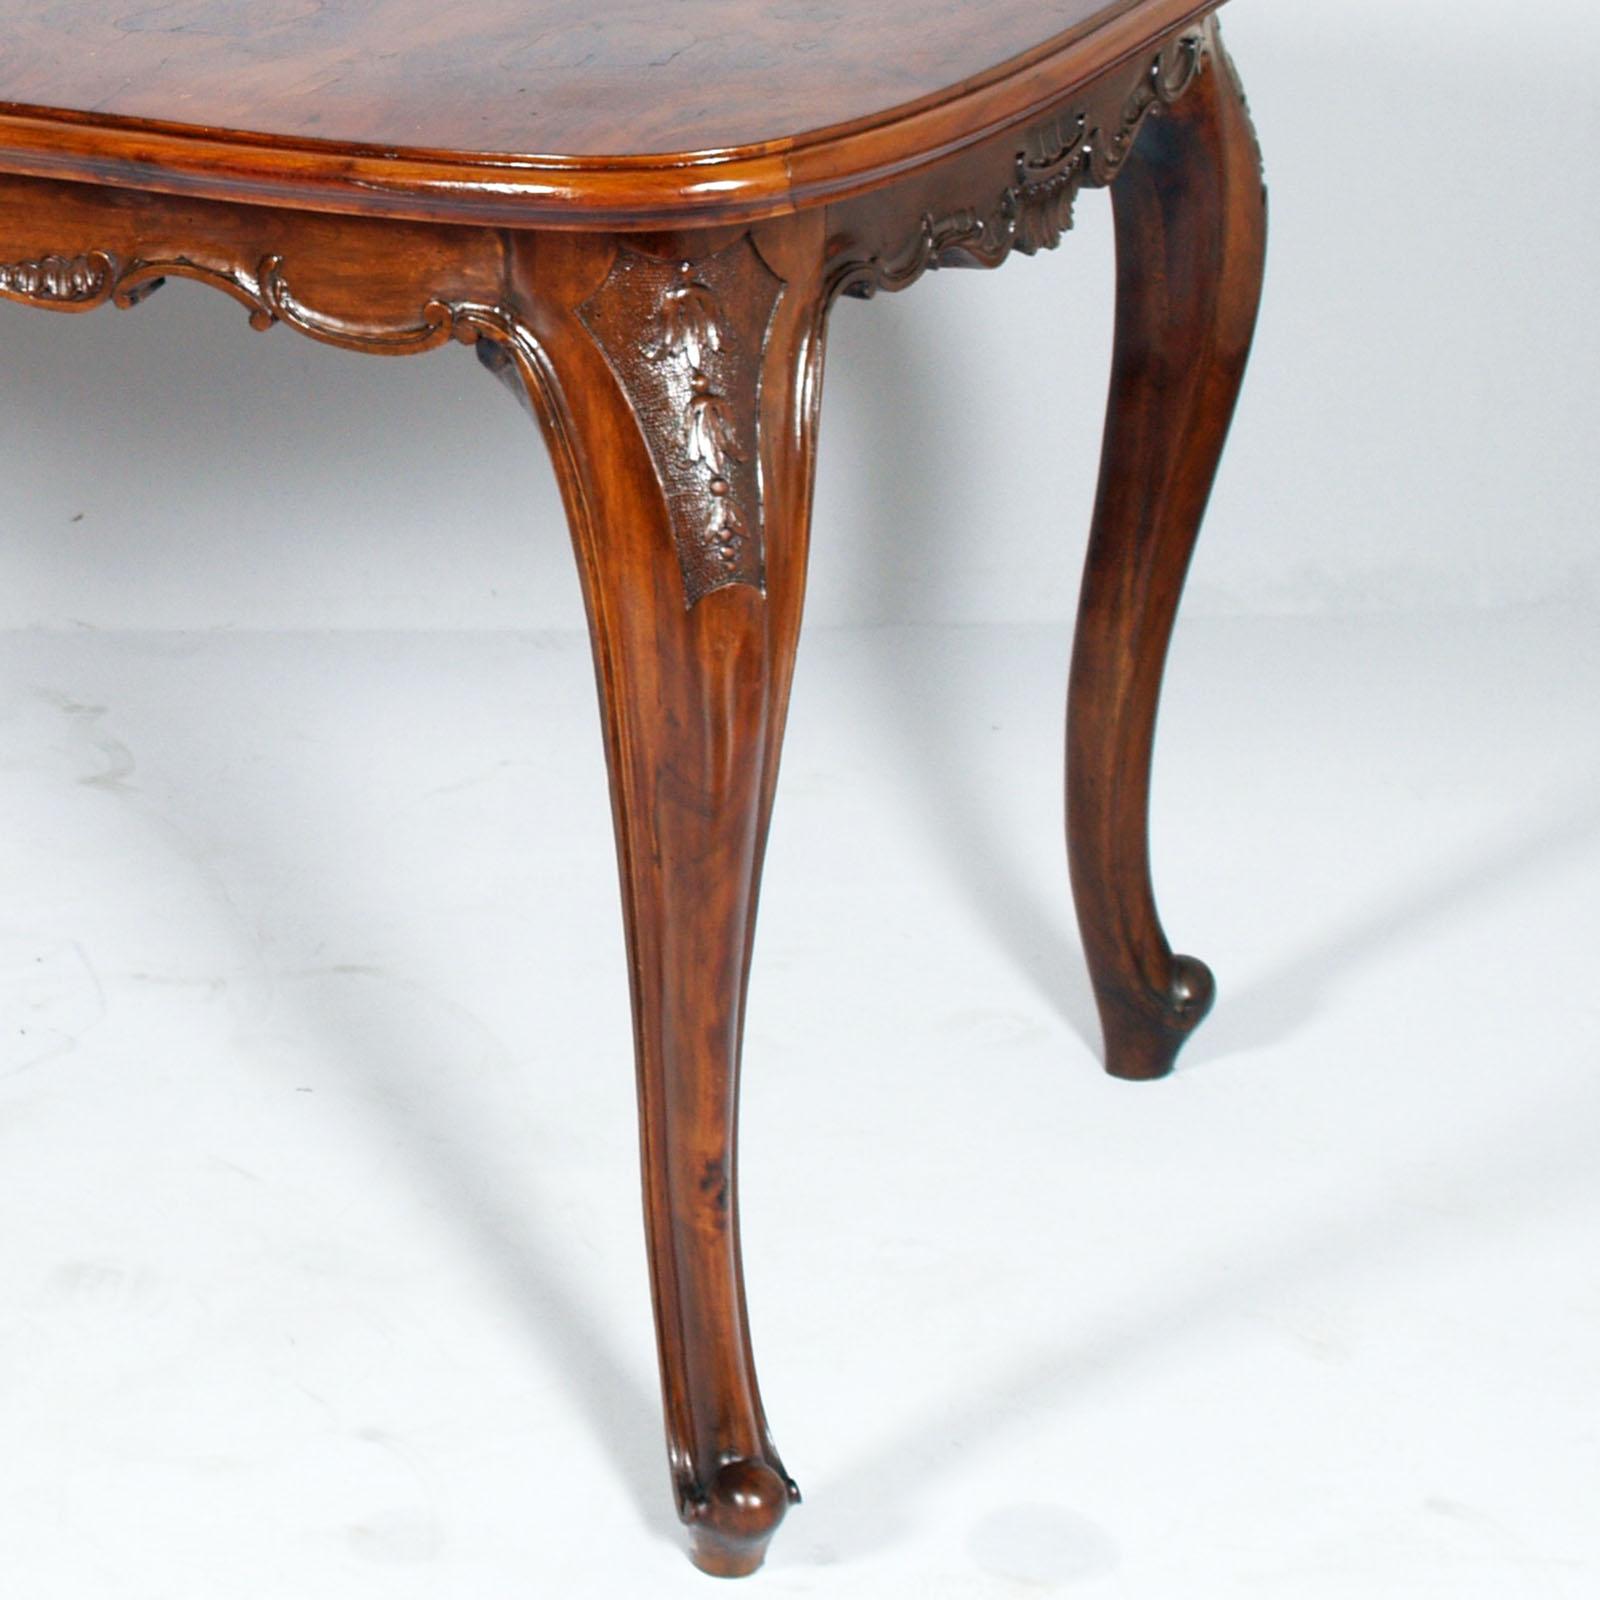 Italian Early 20th Century Baroque Venetian Burl Walnut Hand-Carved Dining Table, 1910s For Sale